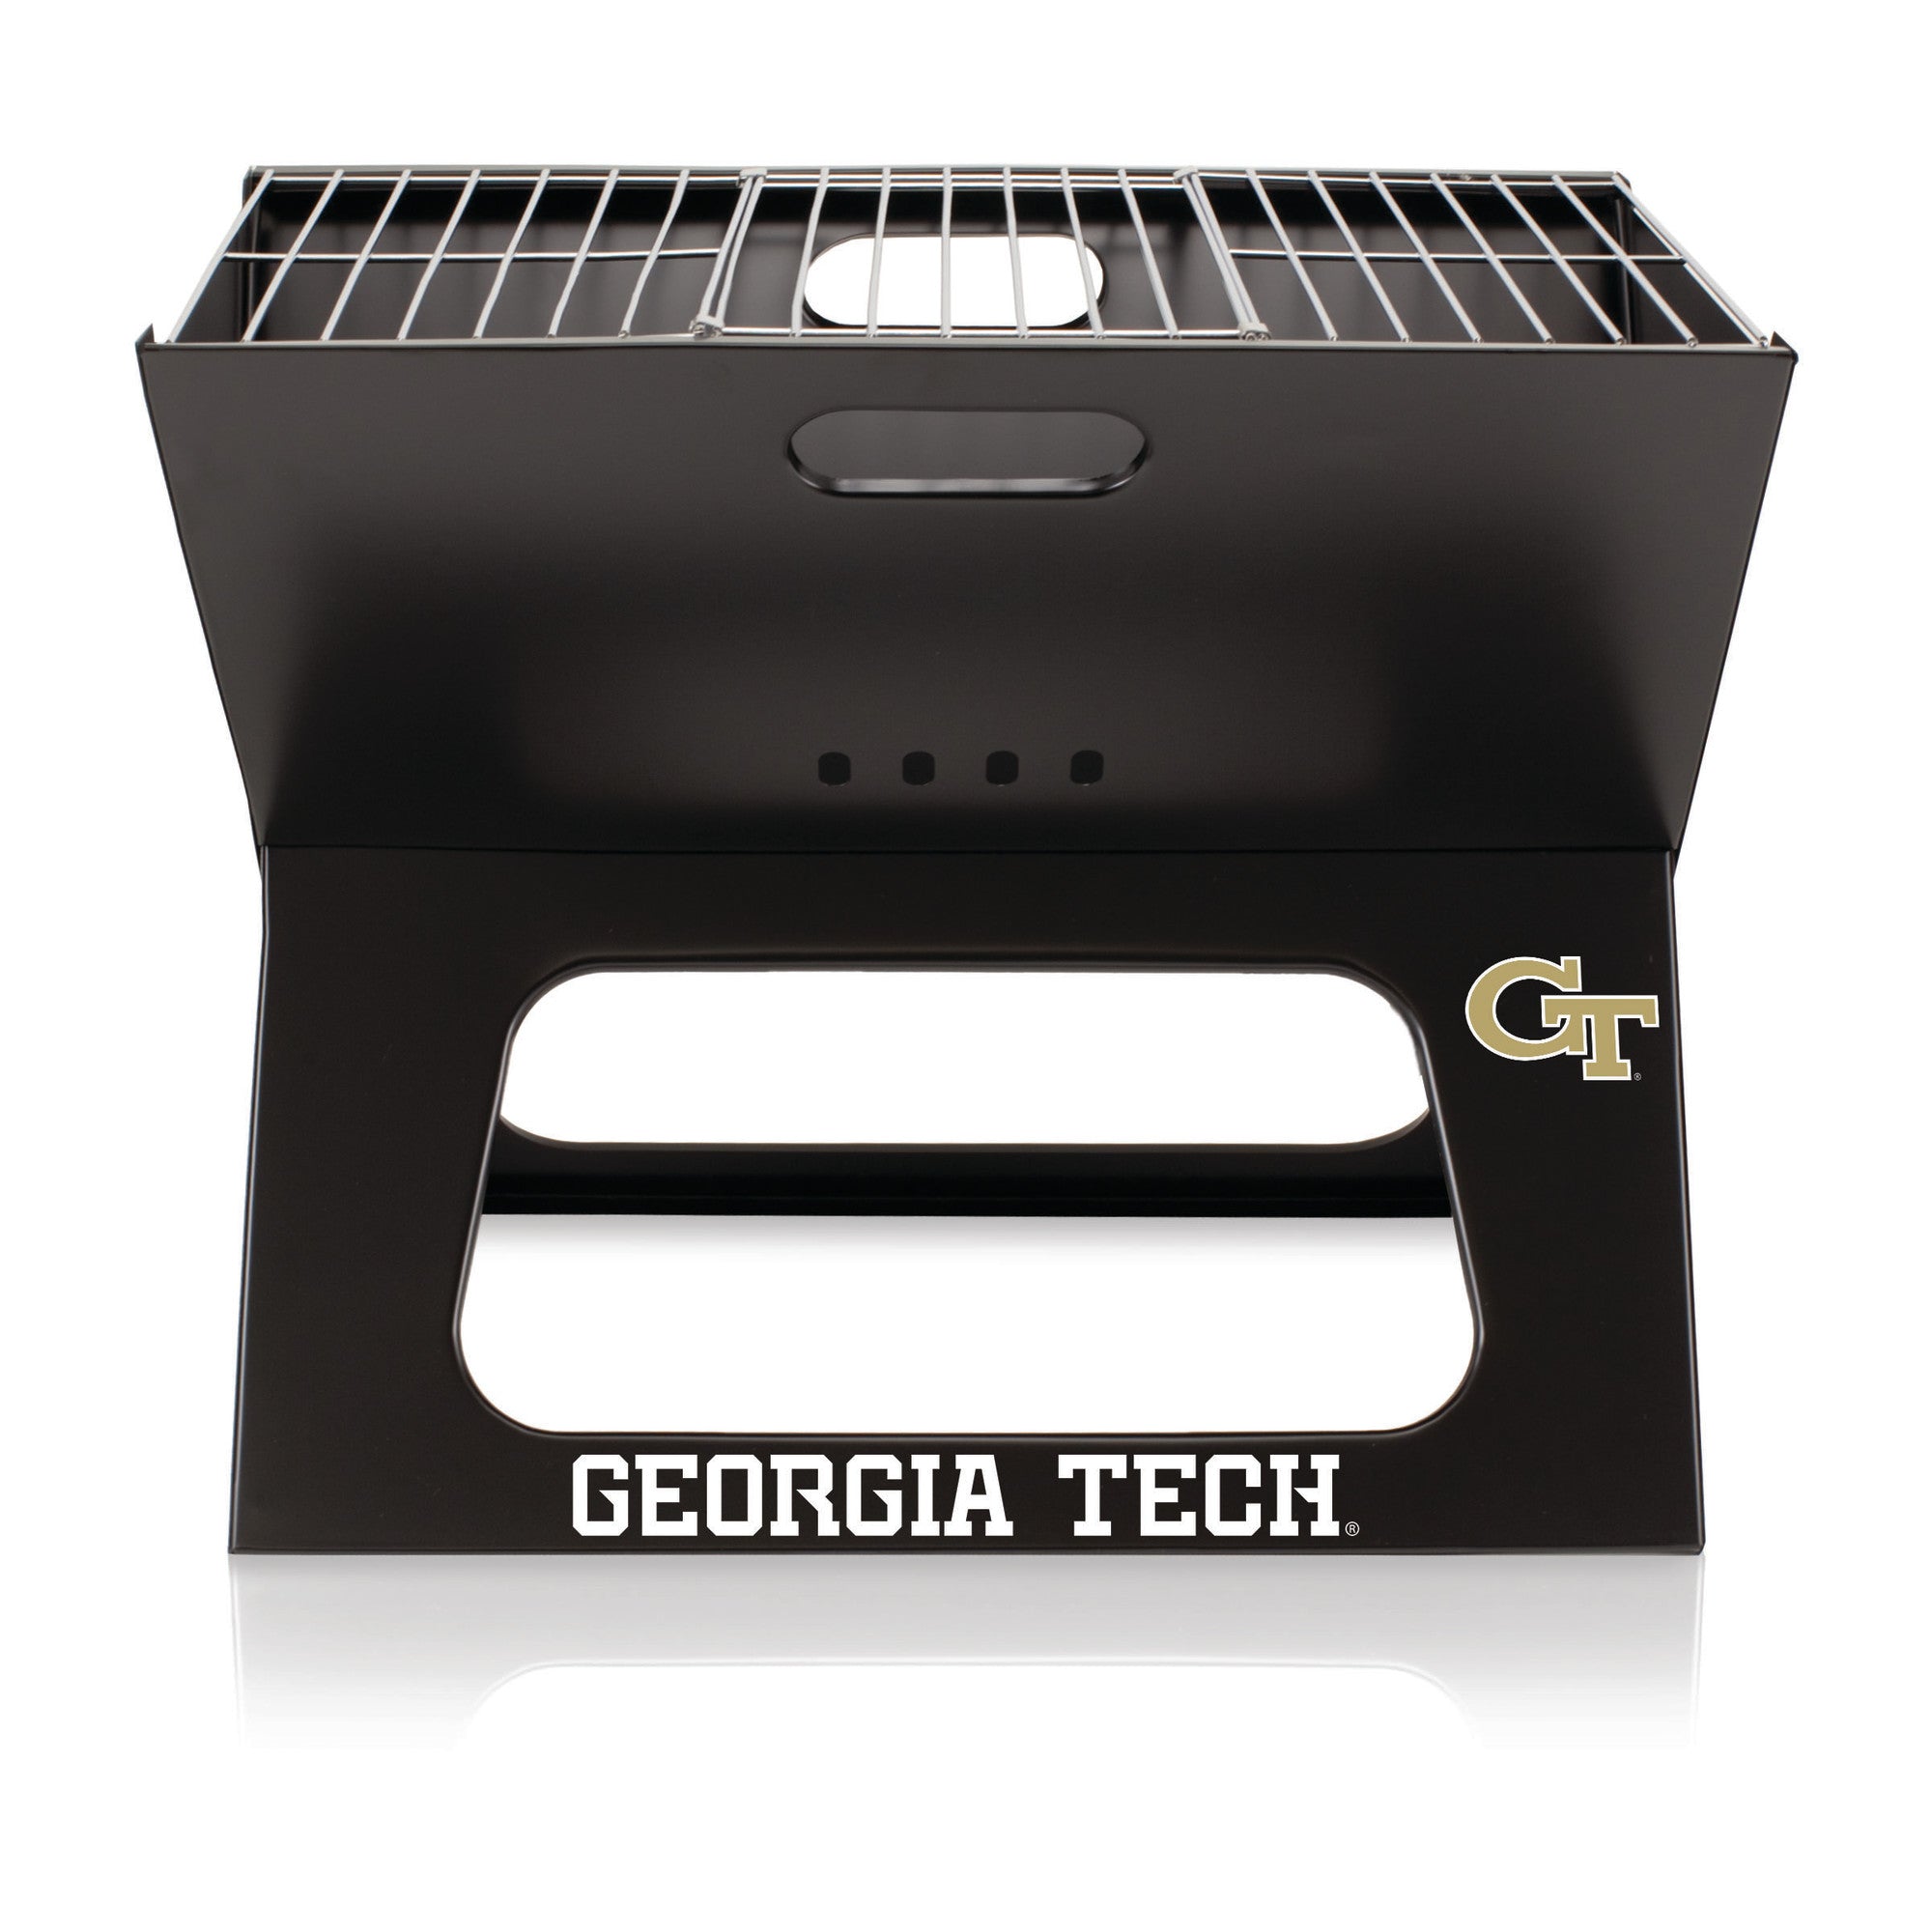 Georgia Tech Yellow Jackets - X-Grill Portable Charcoal BBQ Grill